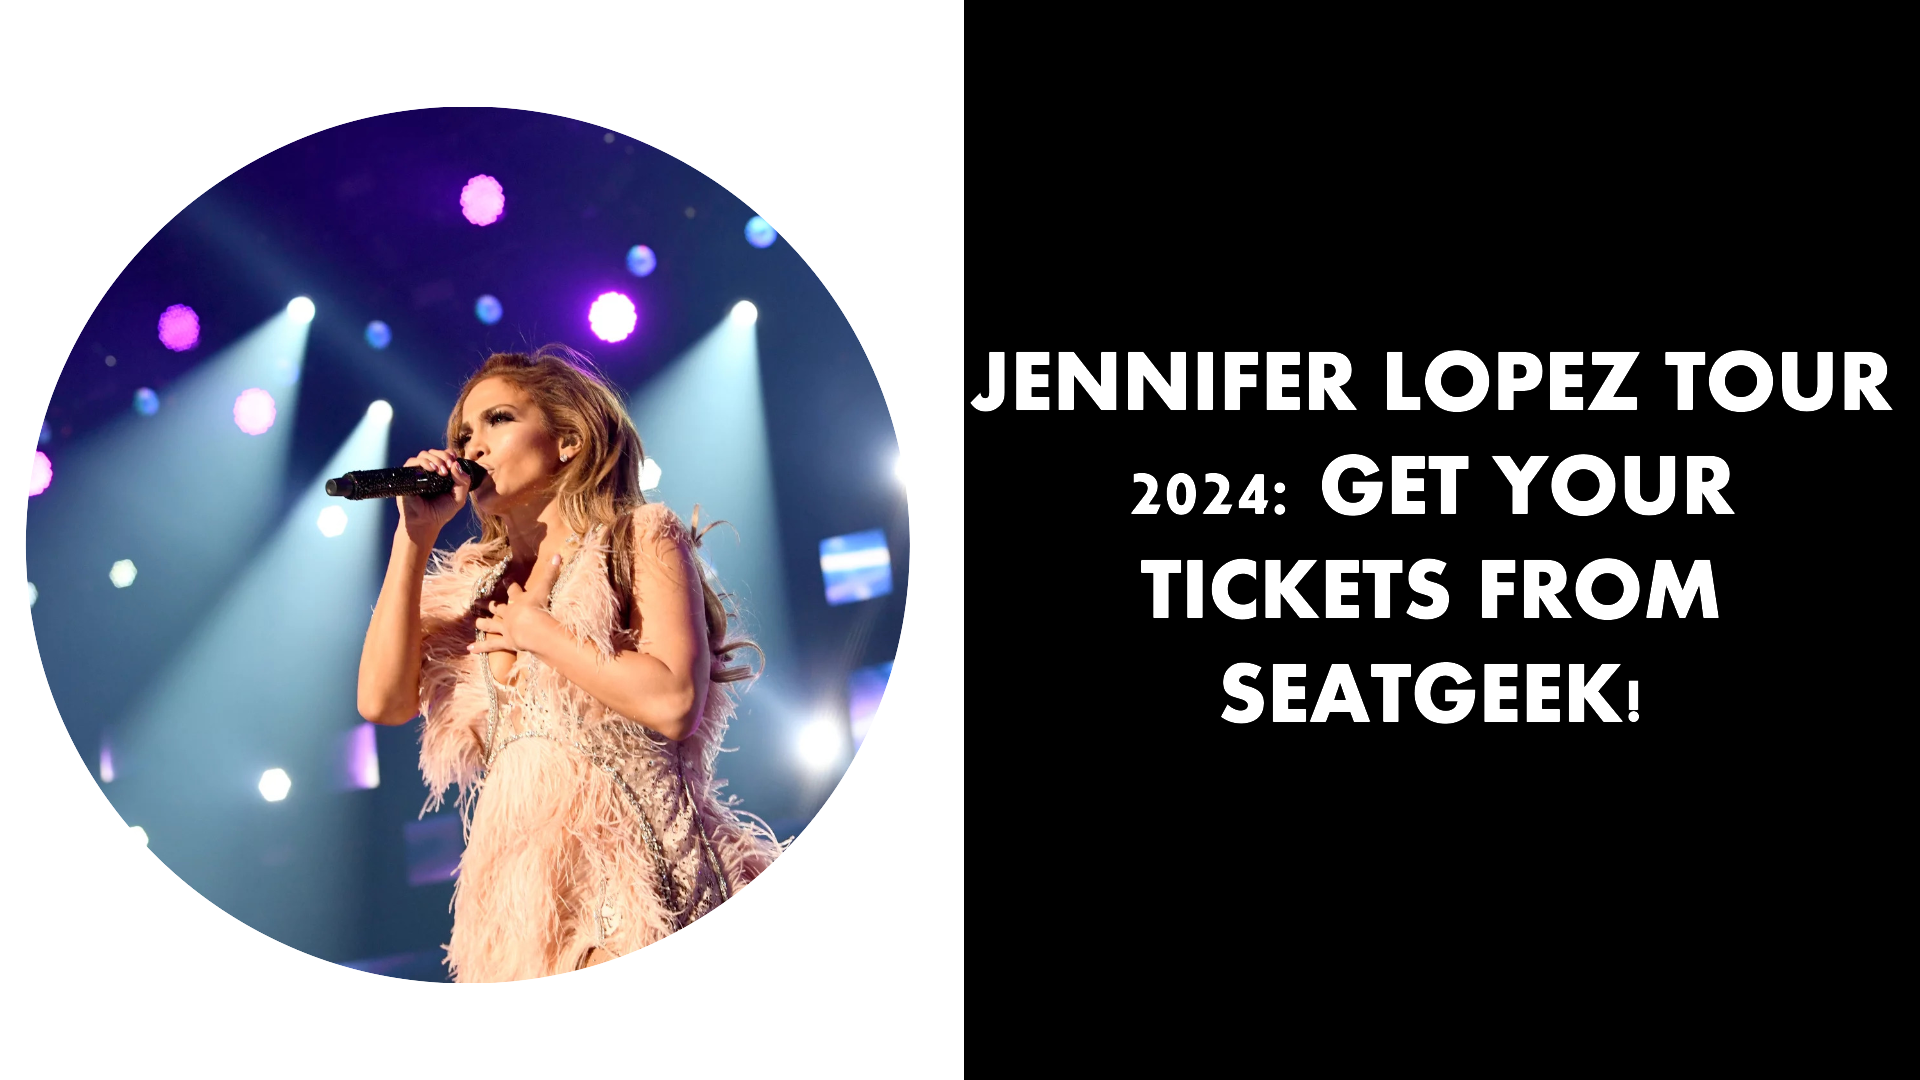 Jennifer Lopez Tour 2024: Get Your Tickets from SeatGeek!